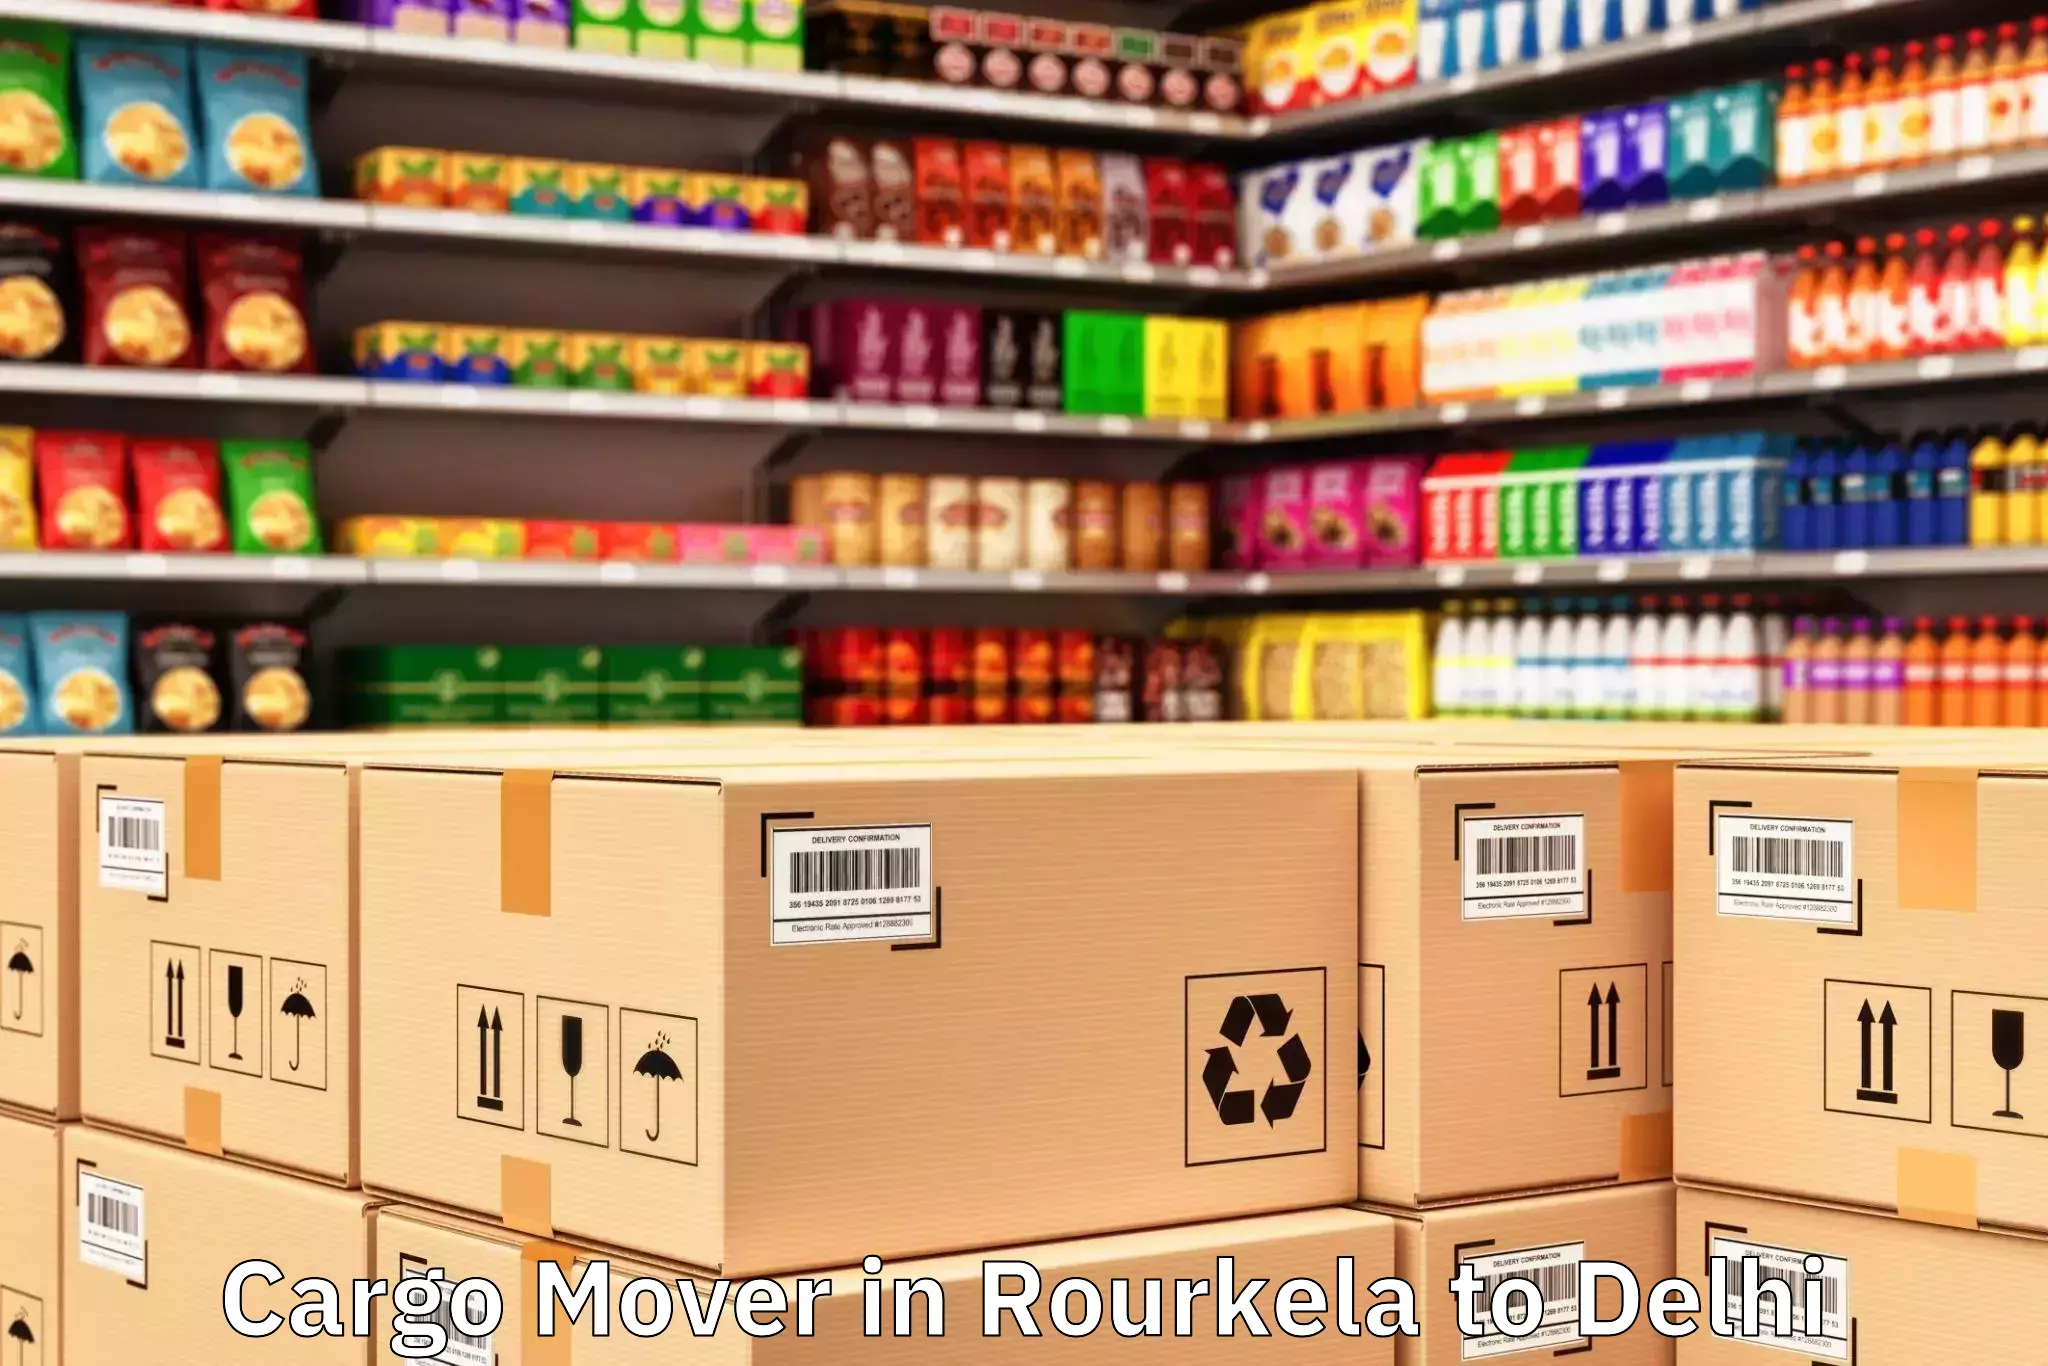 Discover Rourkela to Indian Agricultural Research Institute New Delhi Cargo Mover